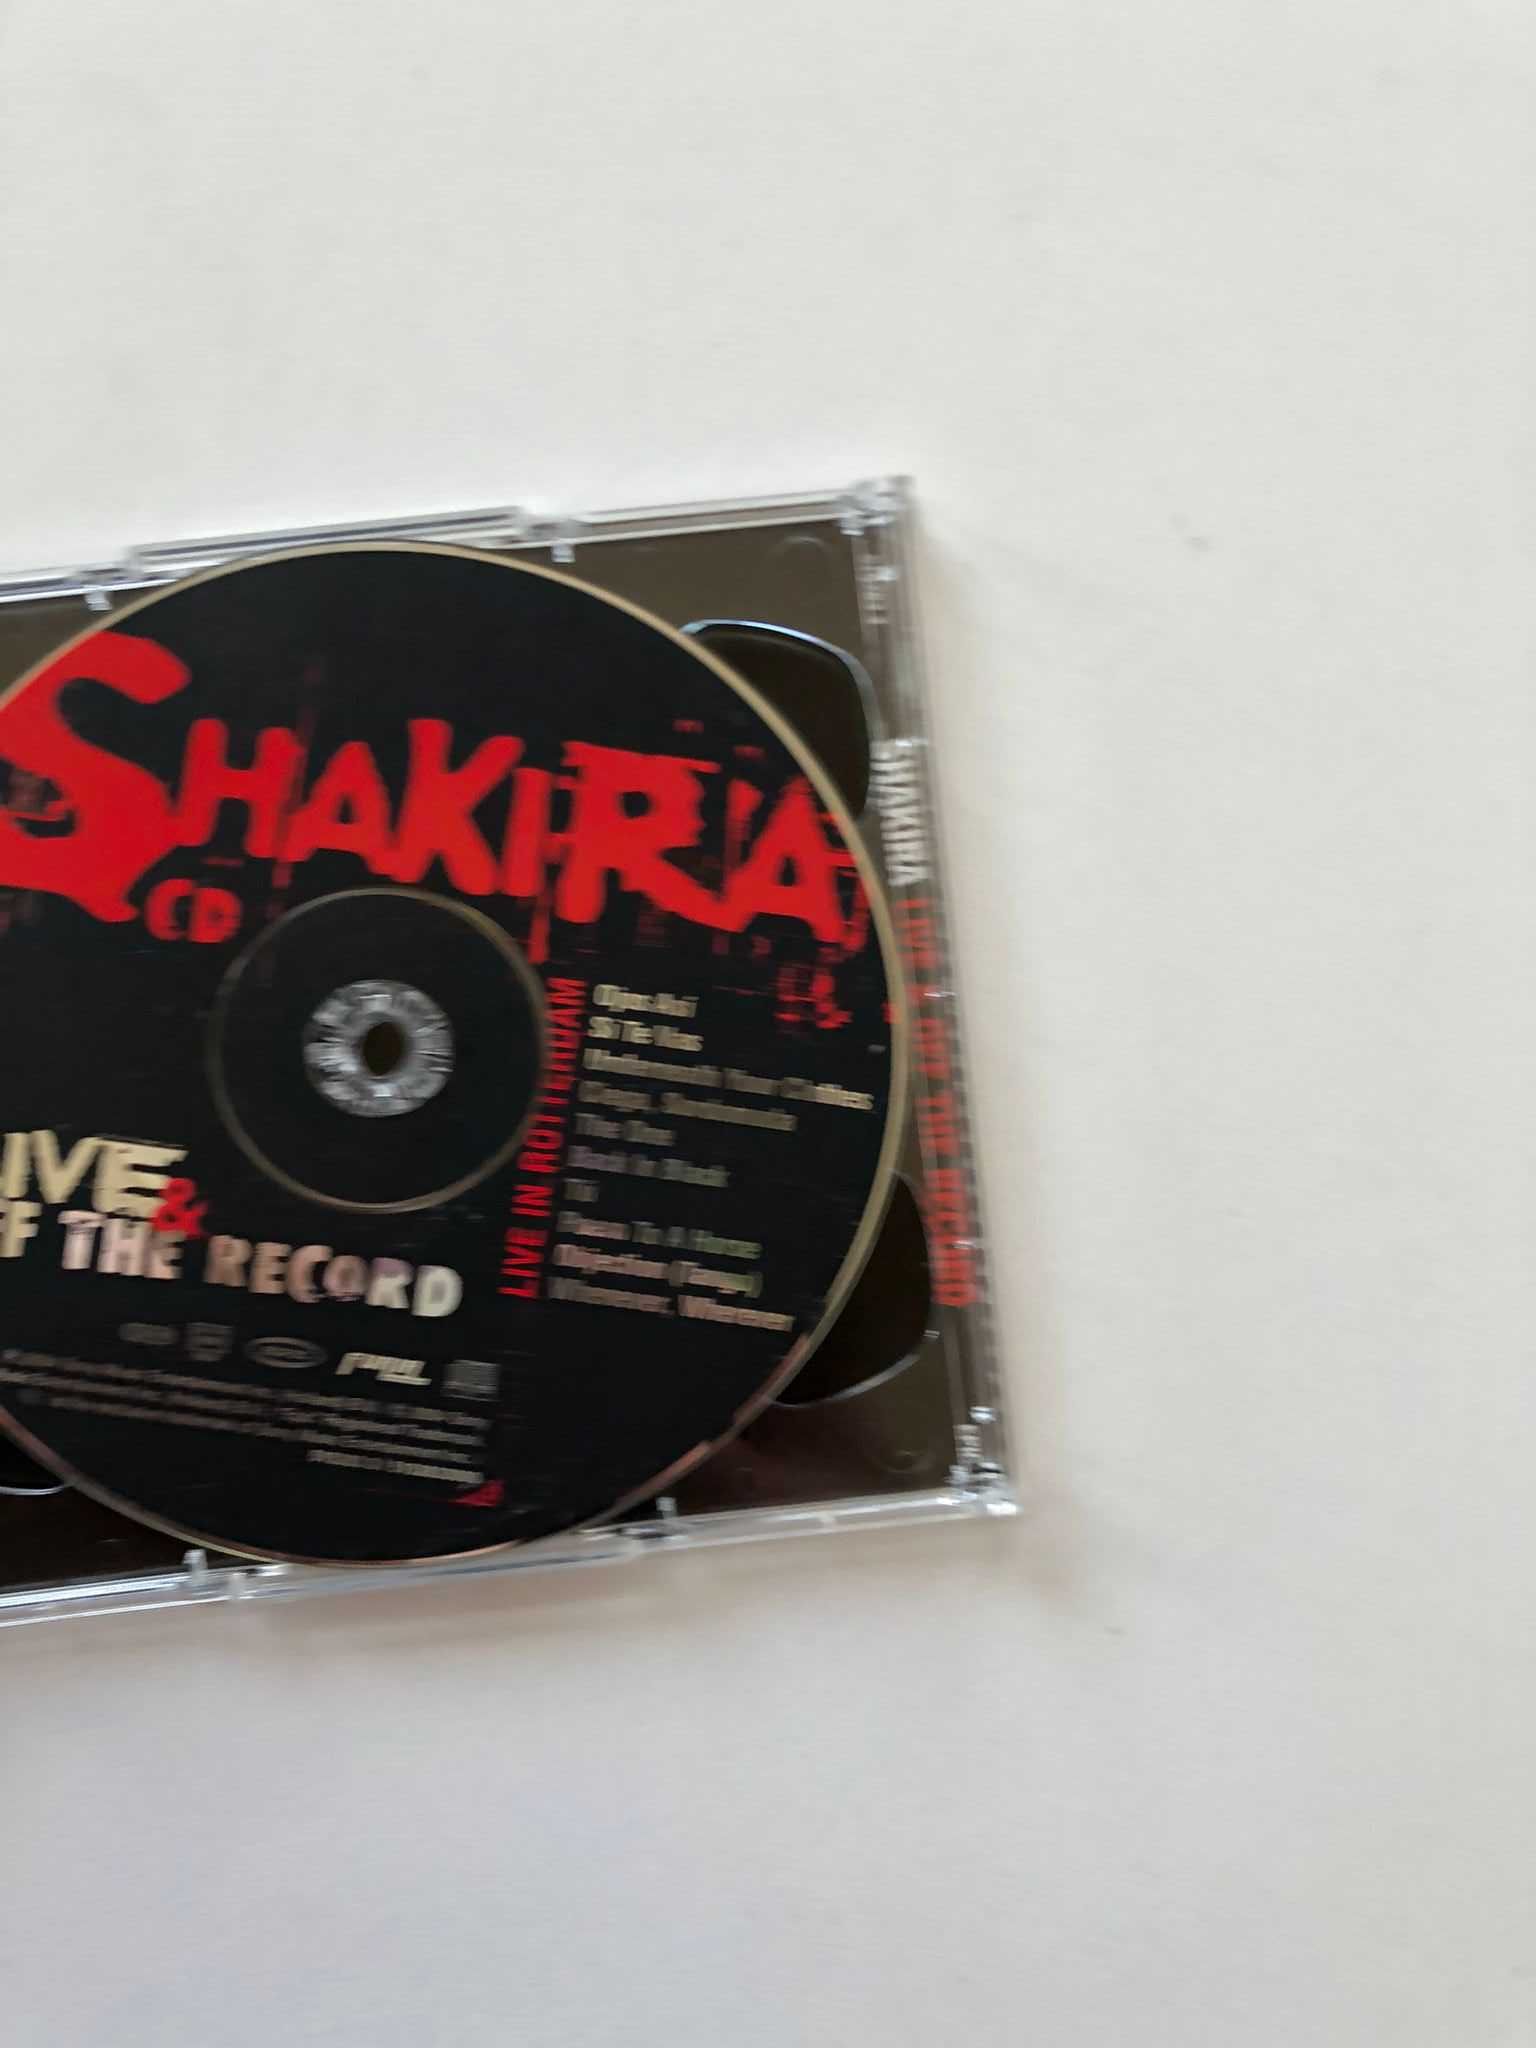 Shakira - Live off the Record - CD